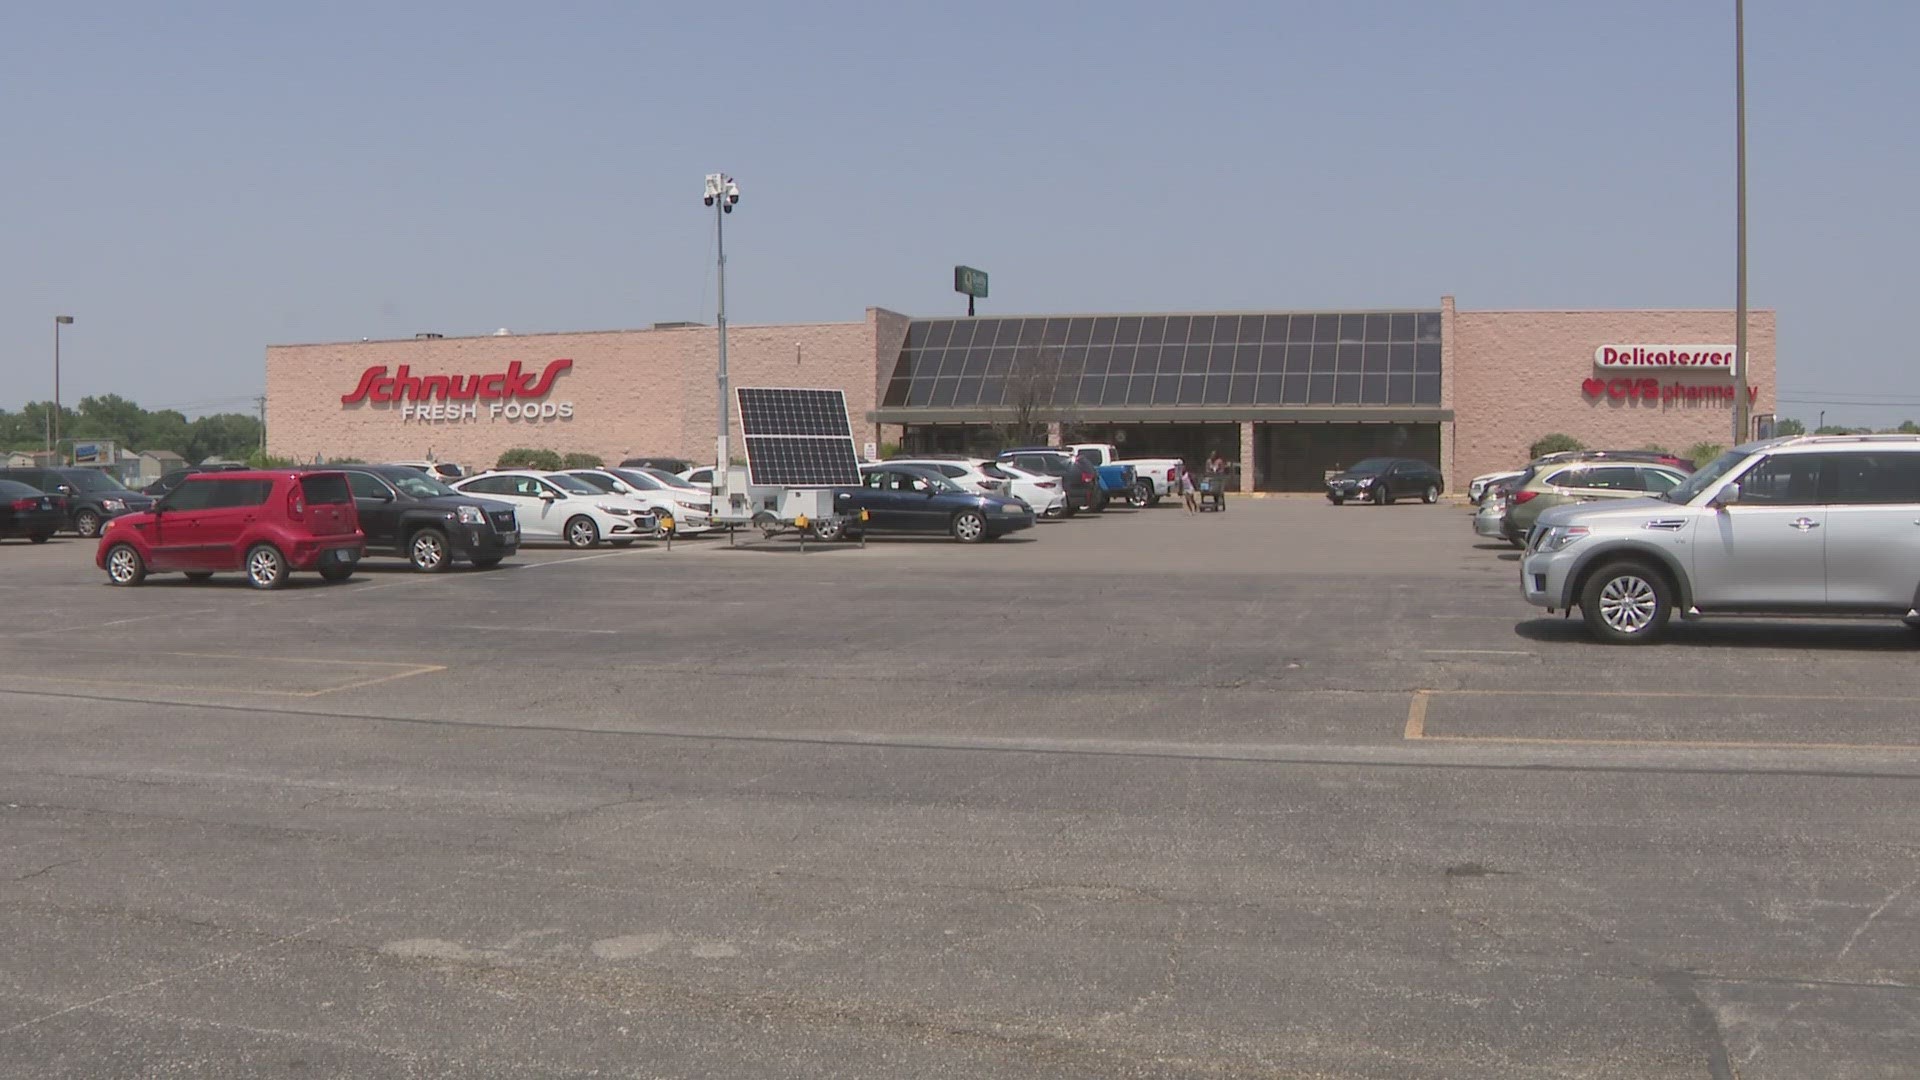 Big changes are underway at a Schnucks grocery store located in the Metro East. The remodel work is expected to be completed this fall.